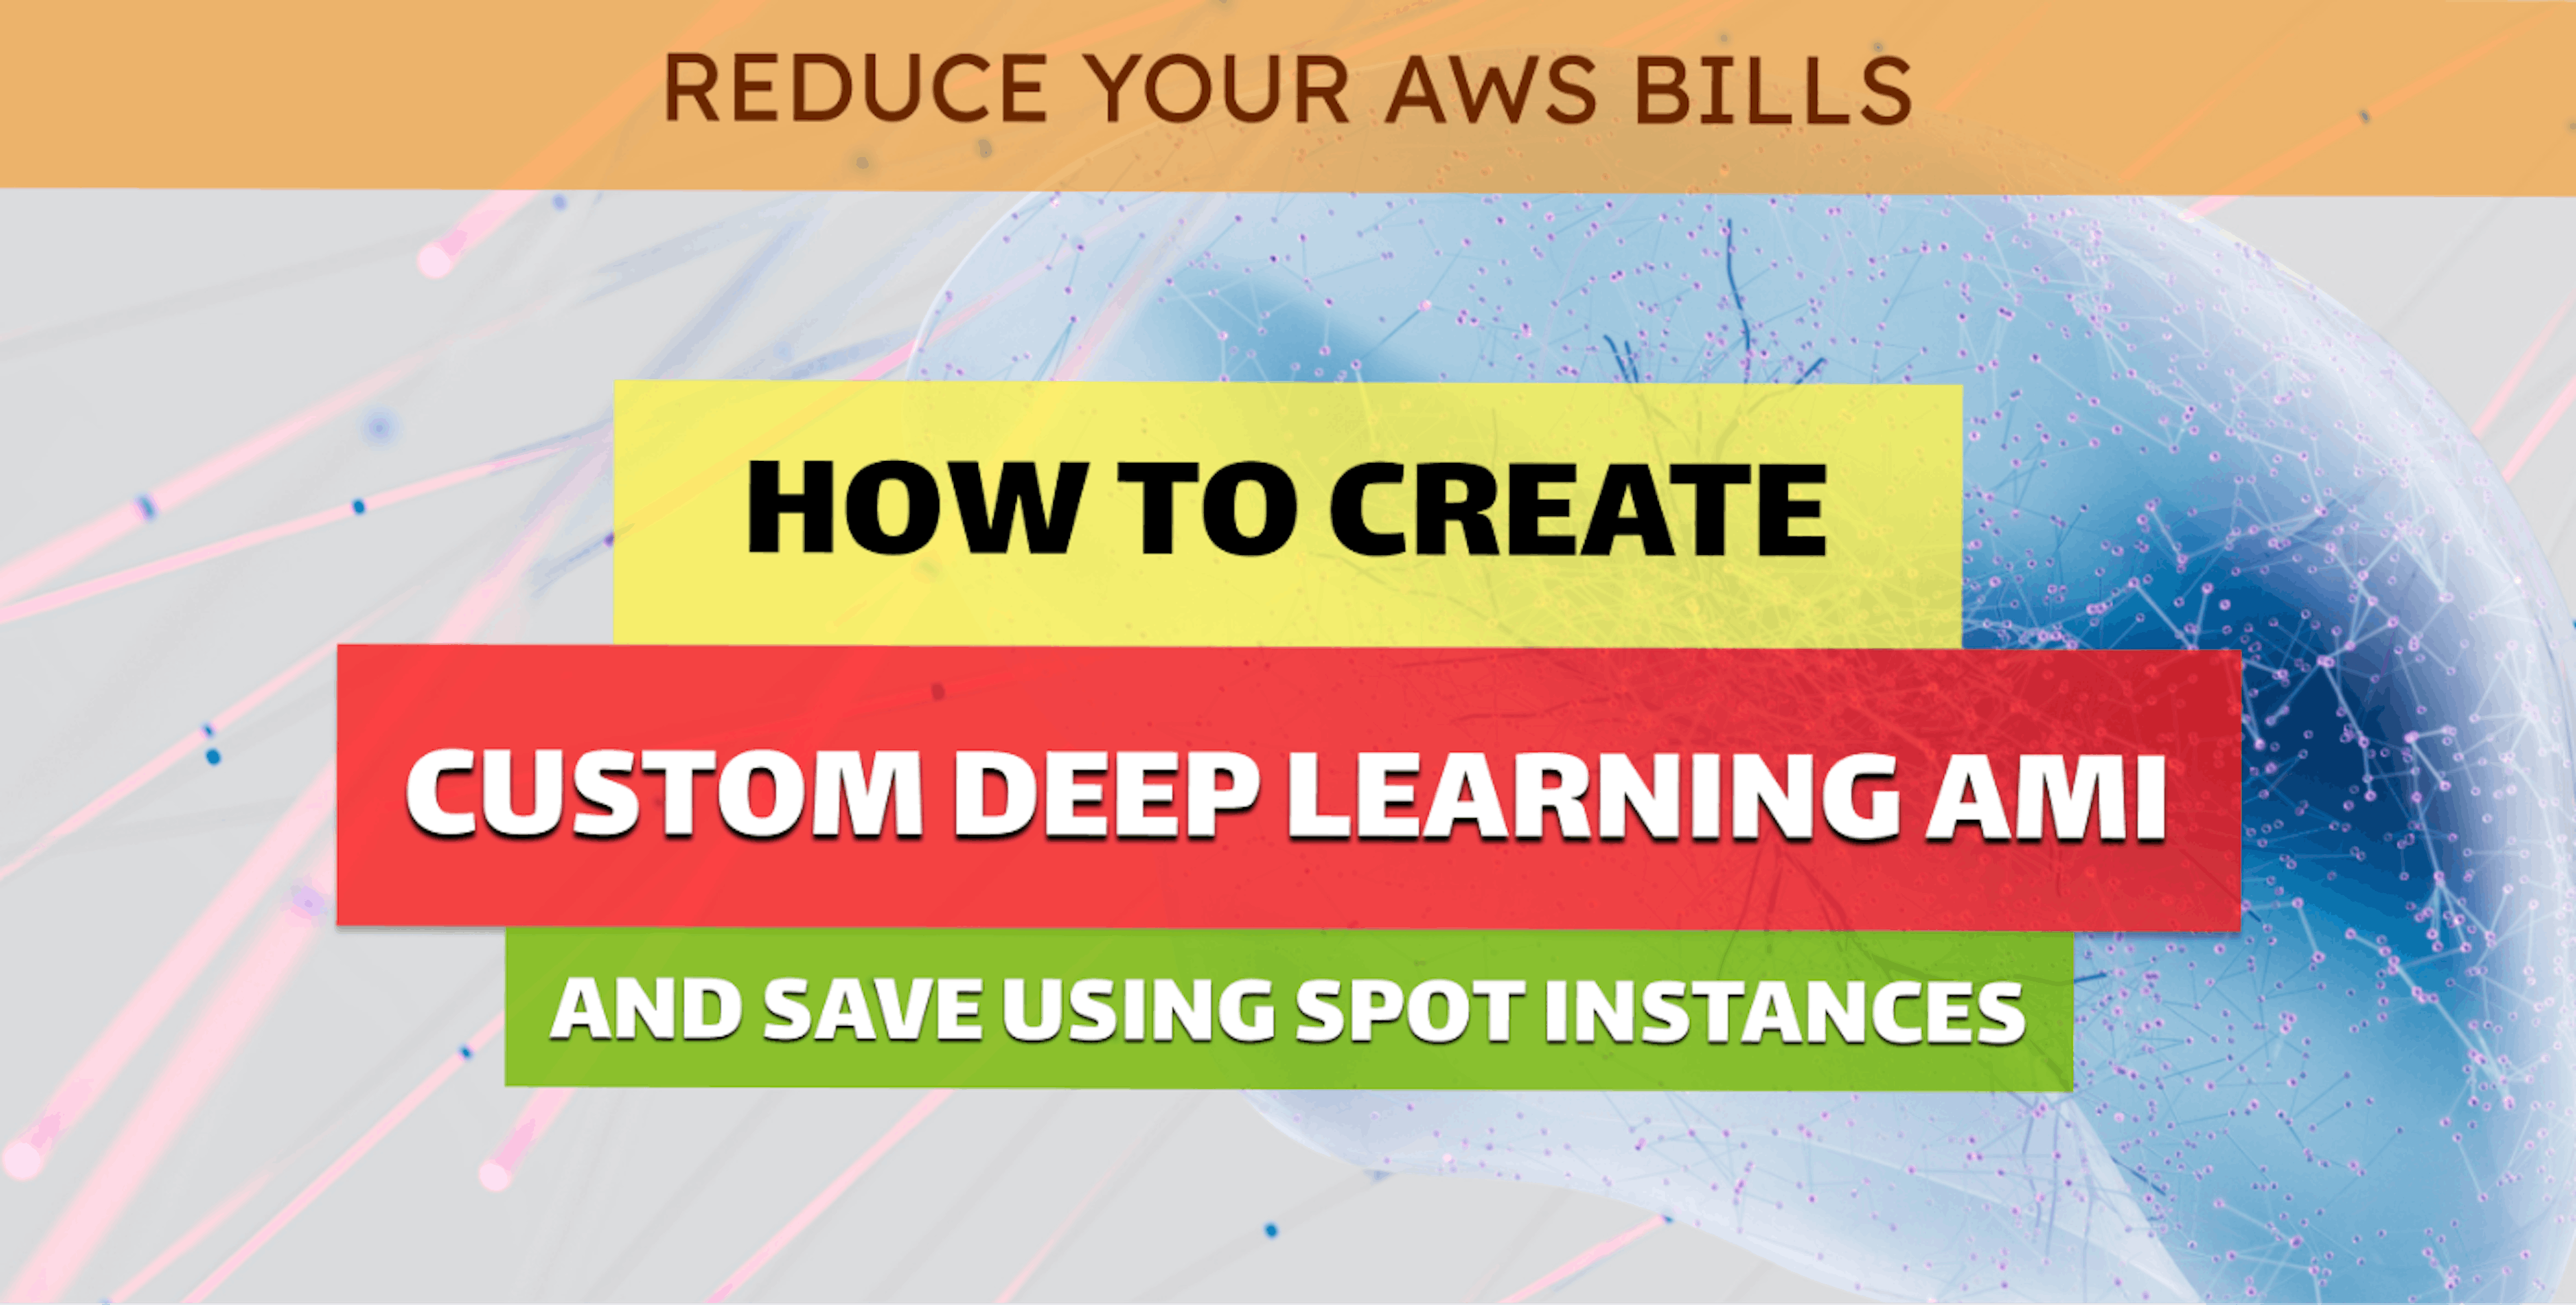 featured image - Creating Cost-Effective Deep Learning with Custom AMIs and Spot Instances on AWS